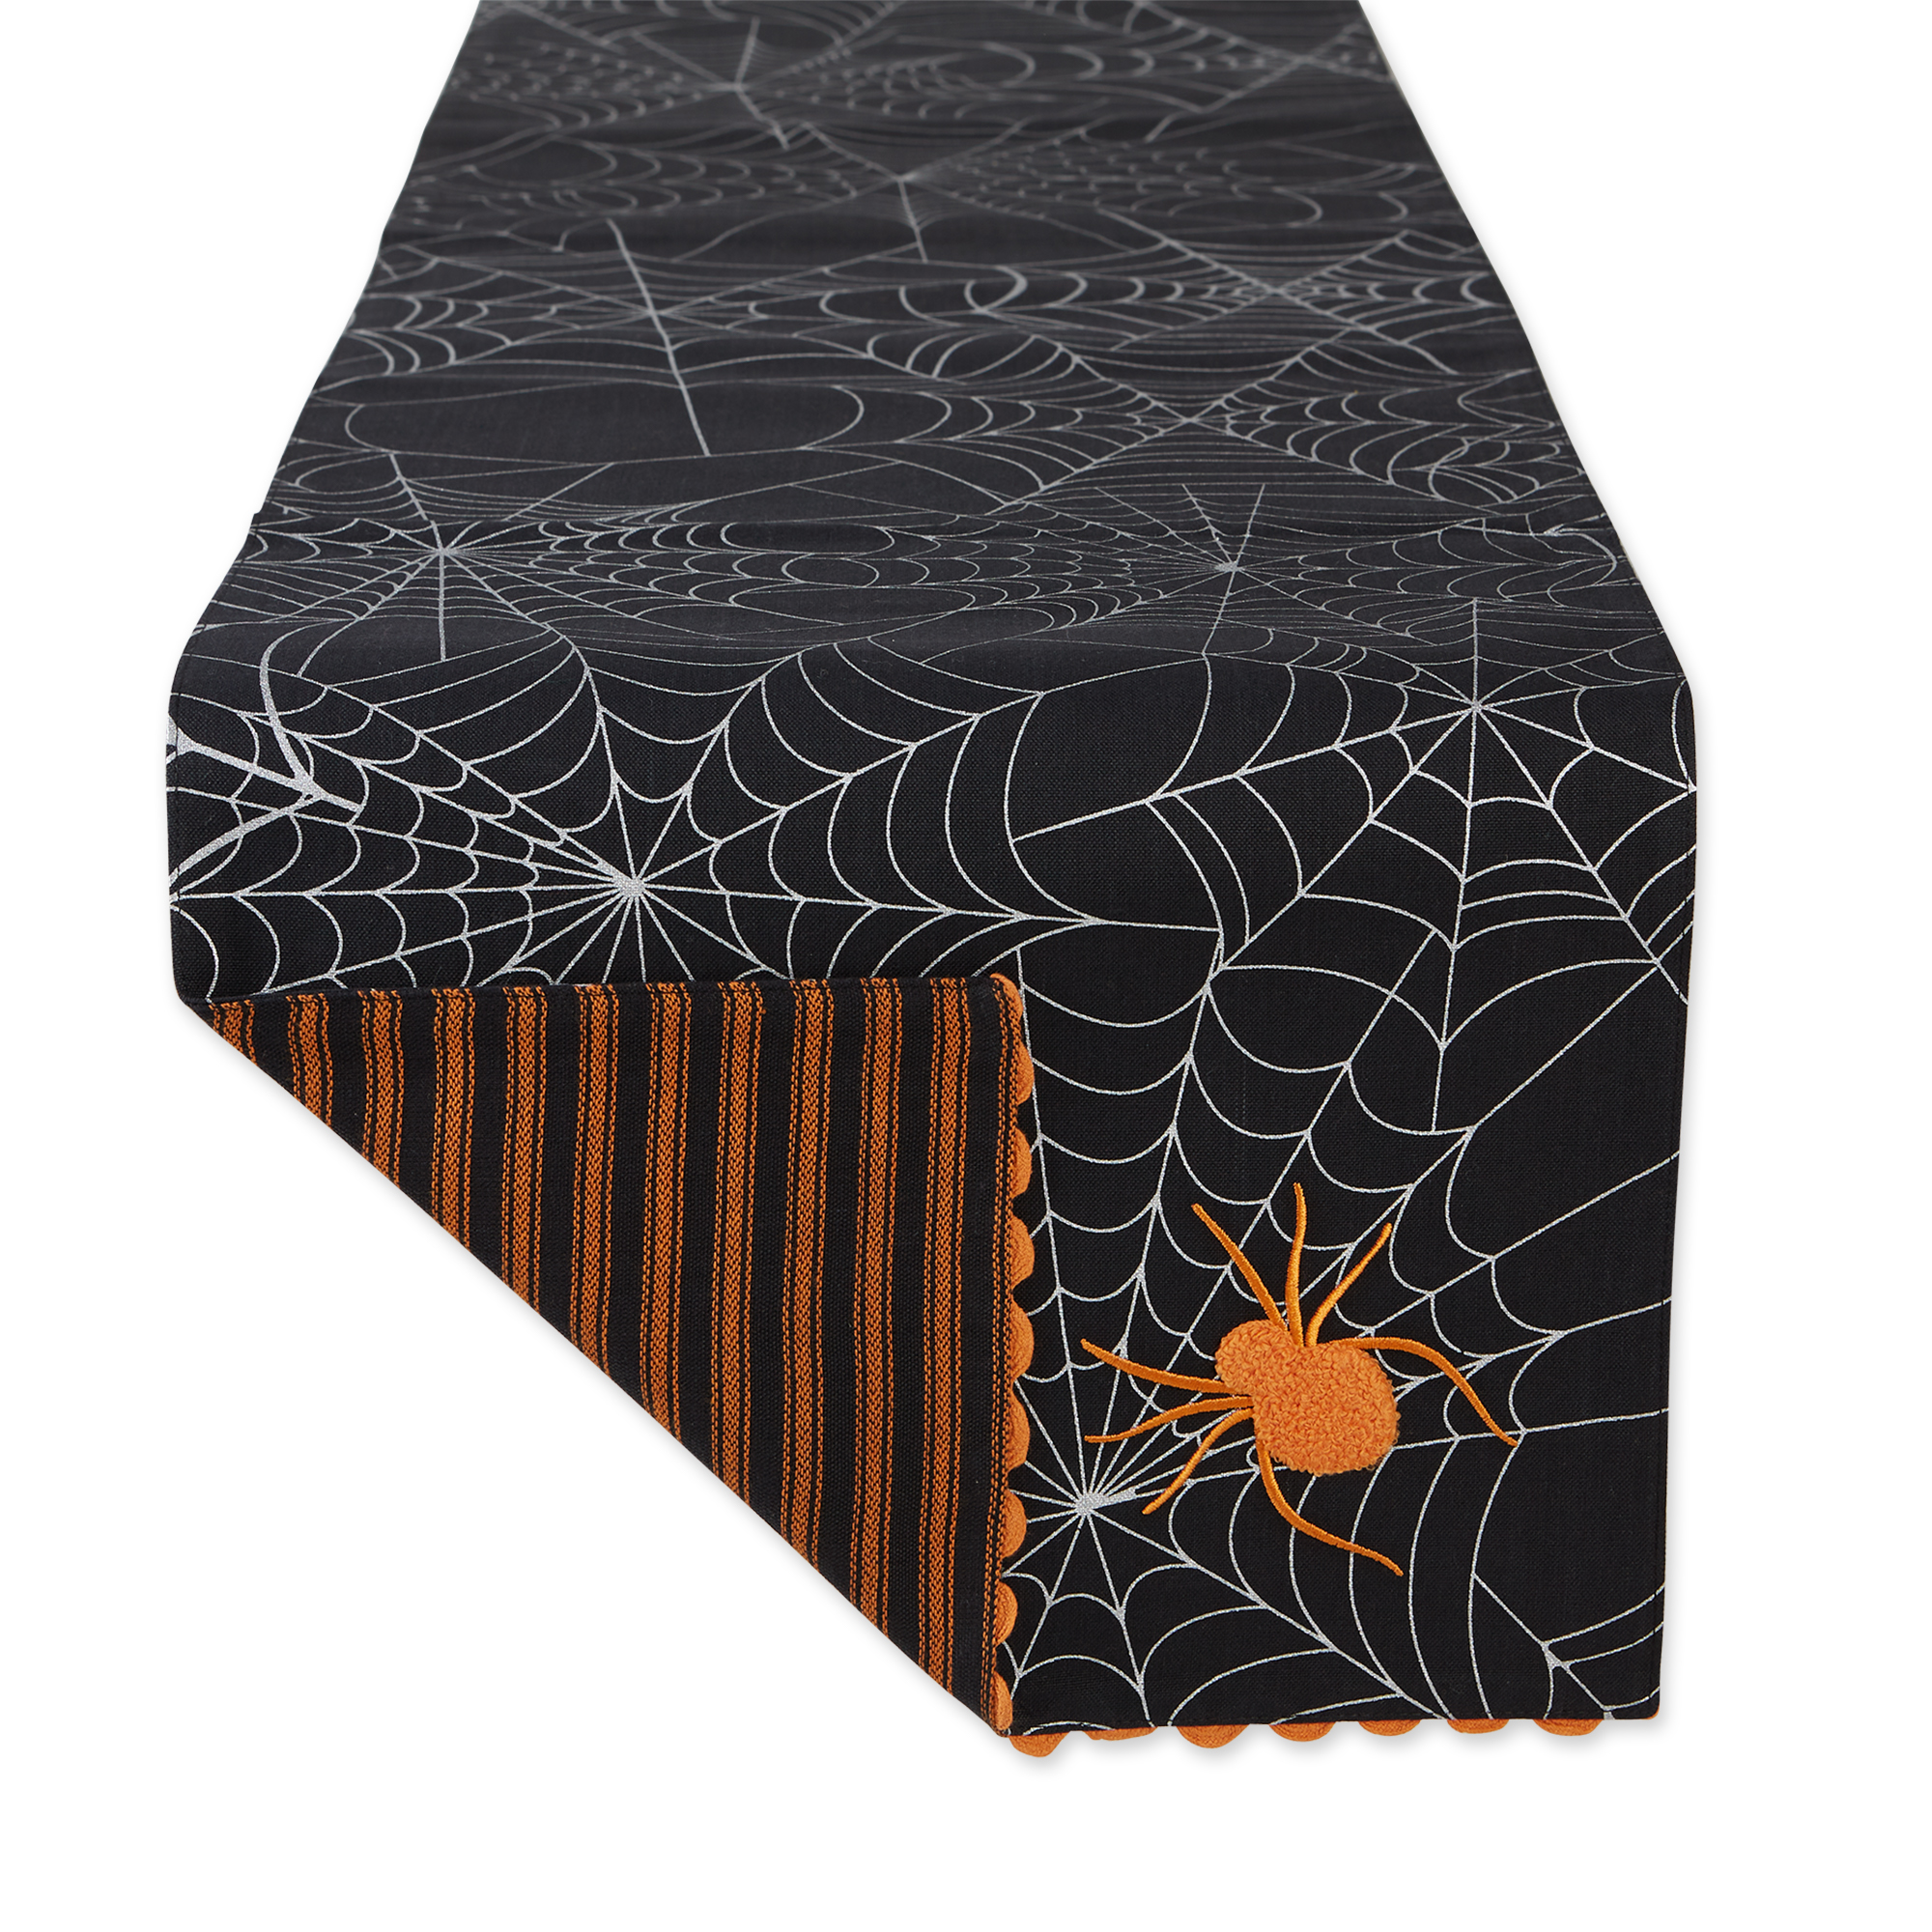 DII Design Imports DII Halloween Happy Haunting Spooky Spider Reversible Table Runner 14x70"